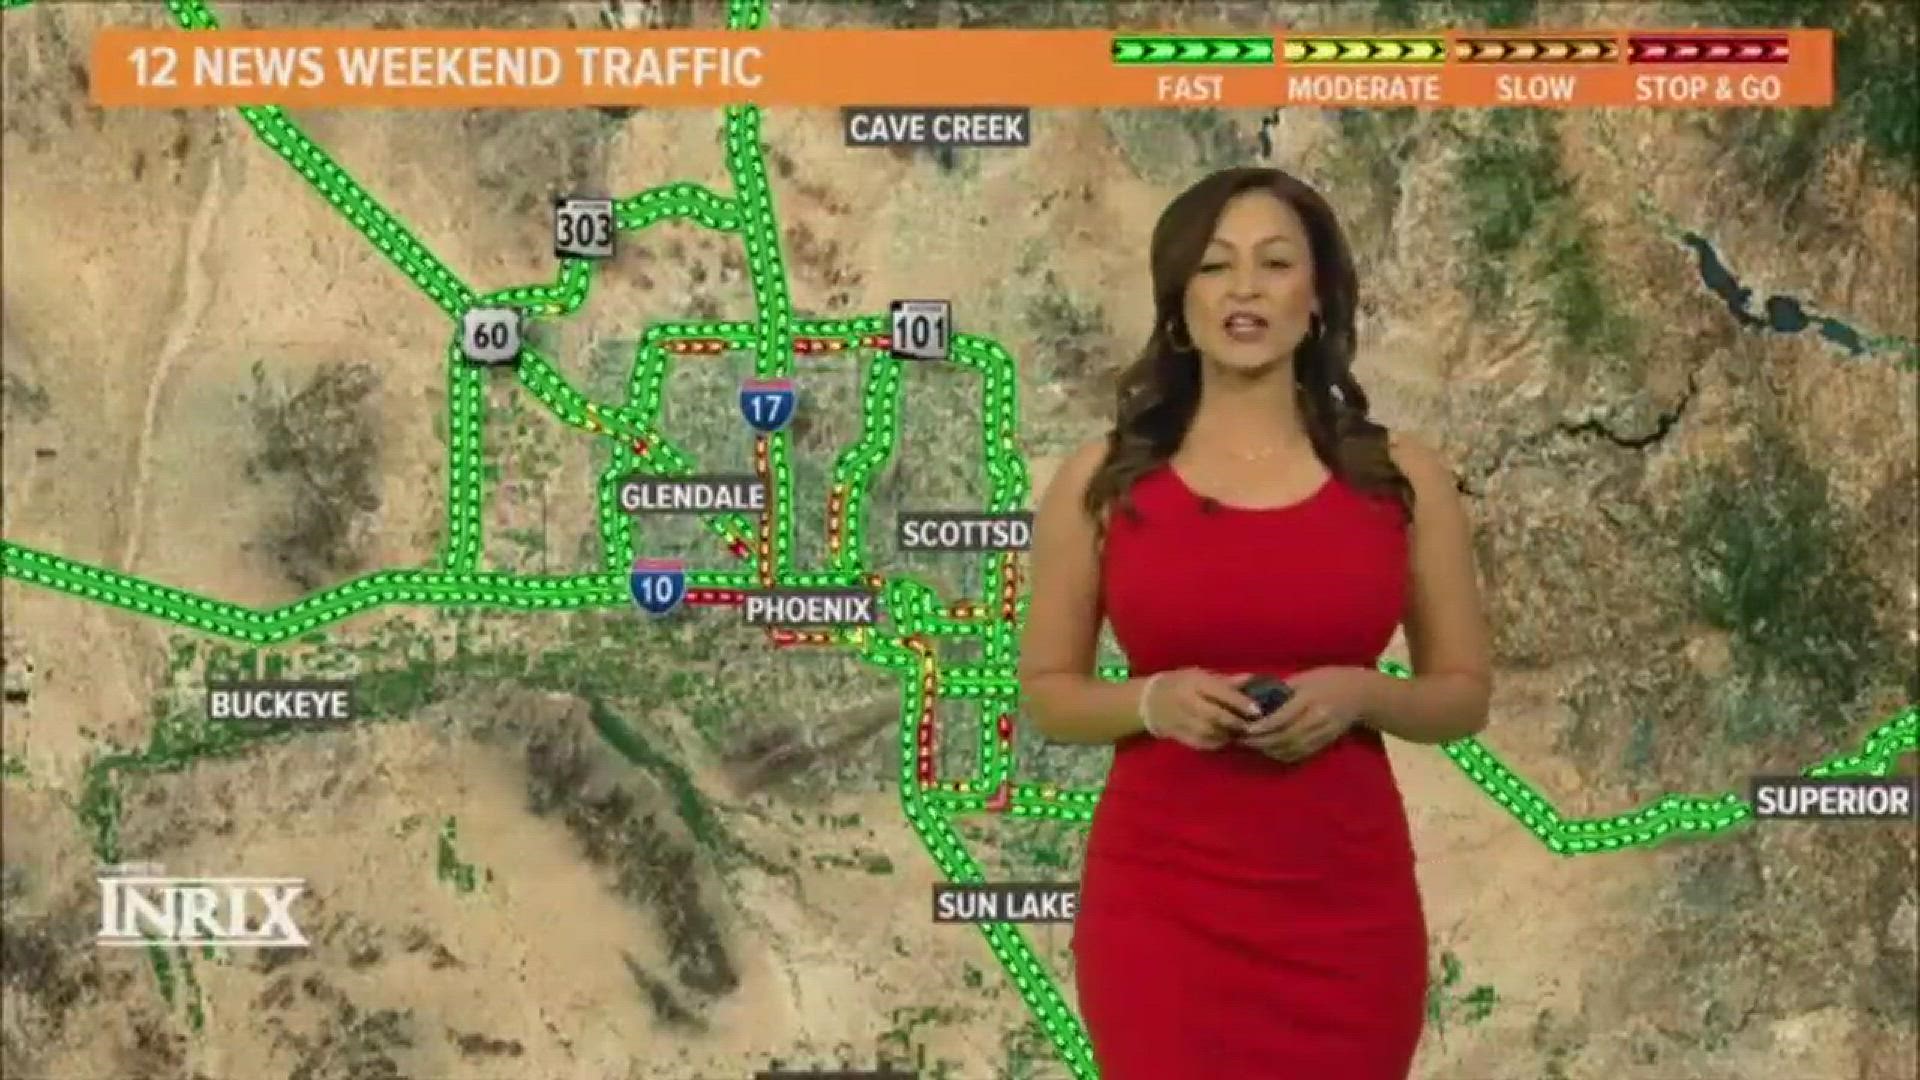 A look at the construction and closures that could impact traffic this weekend in the Valley.